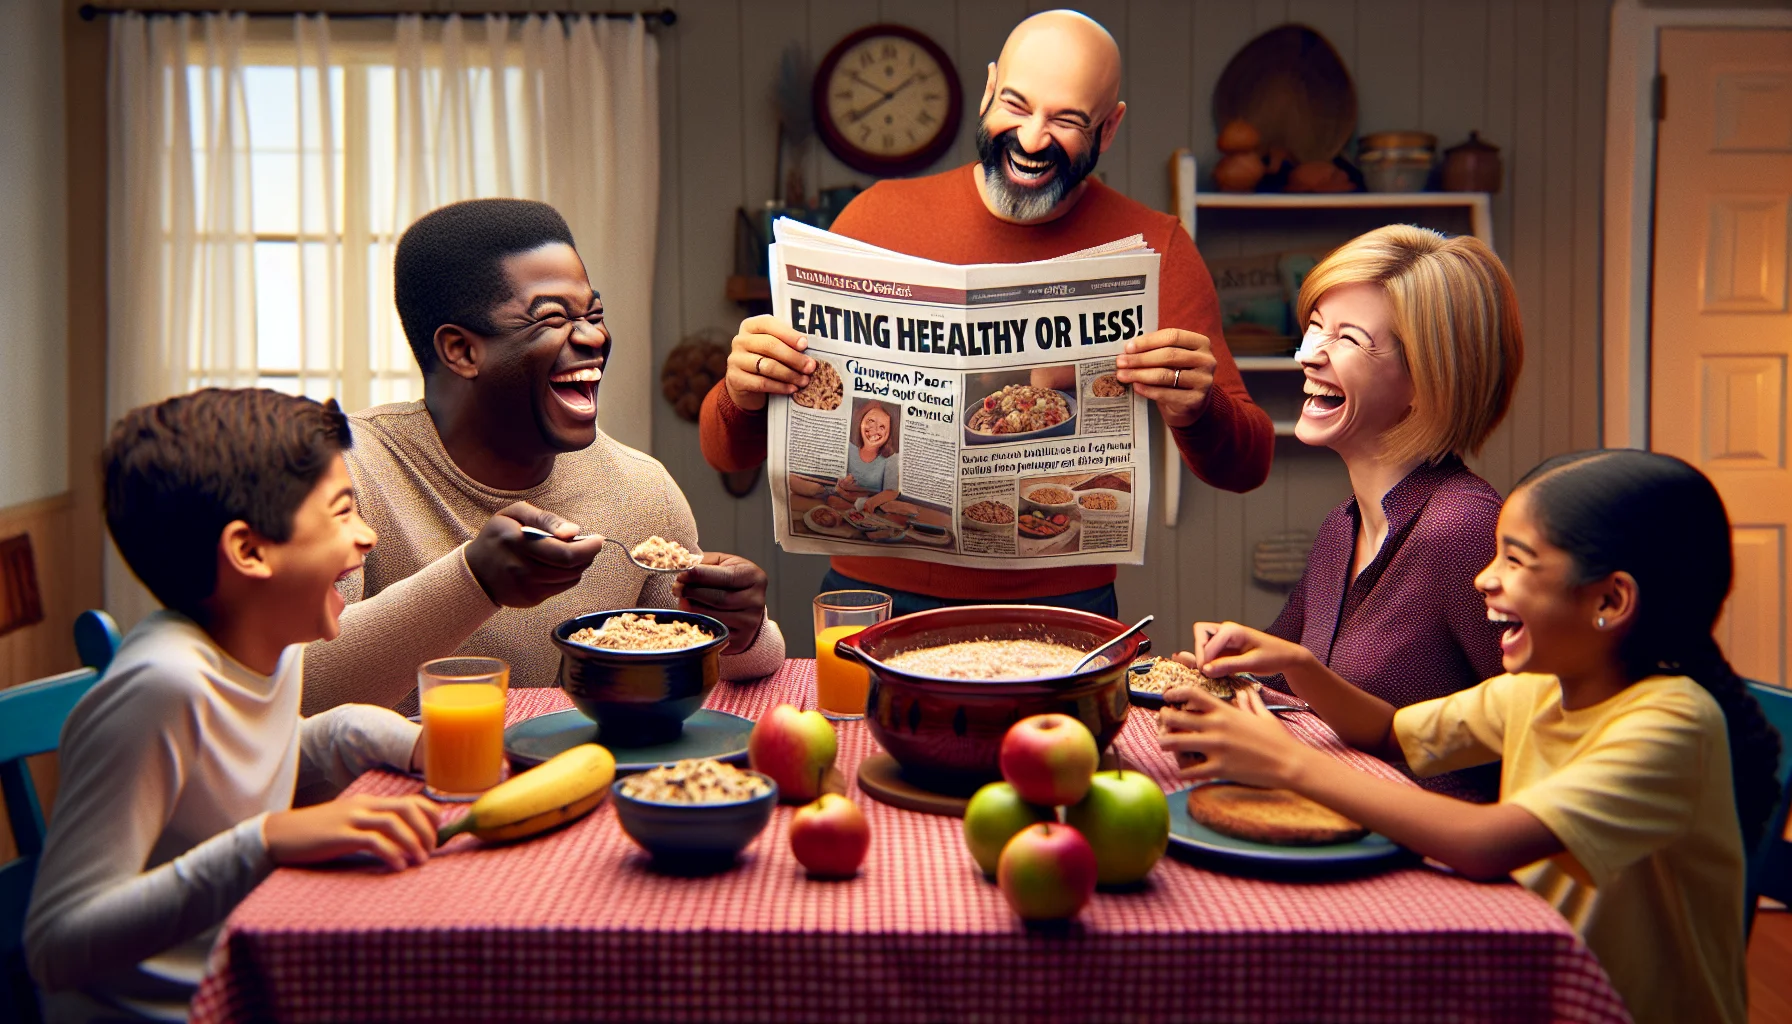 Create a vibrant, realistic image embodying humor and frugality. Picture a family breakfast scene, where a Black mother is serving warm, appetizing servings of cinnamon pear baked oatmeal from a ceramic dish. Her South Asian husband is holding a newspaper that shows 'Eating Healthy for Less!', making the Caucasian and Hispanic children at the table laugh delightfully. The table should also have various other inexpensive healthy foods. The overall atmosphere is light, enjoyable, and yet subtly emphasizes the importance of healthy, budget-friendly eating.